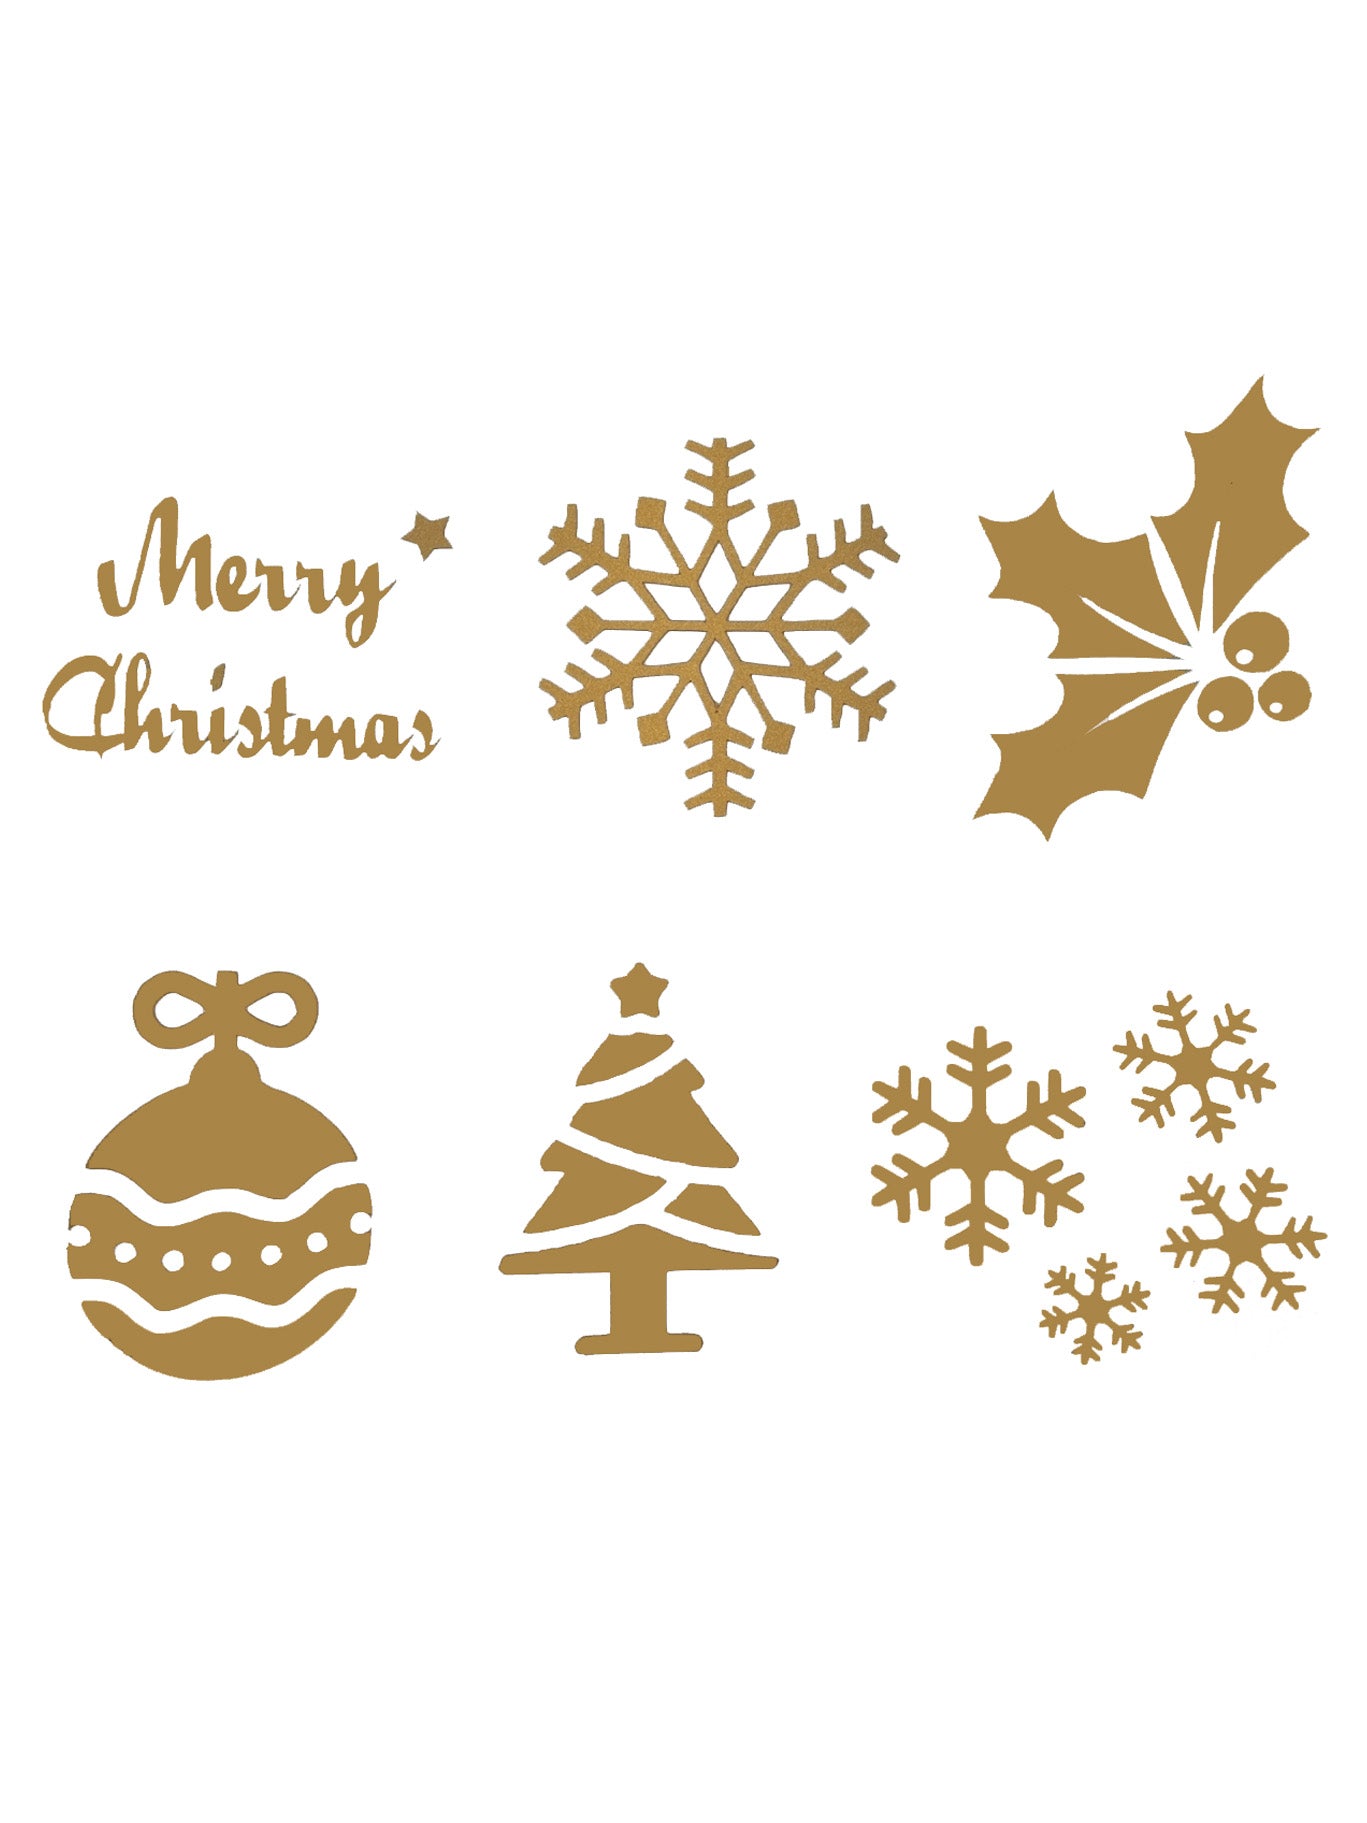 Choice of 2 Christmas Glittered Stickers Sheet 